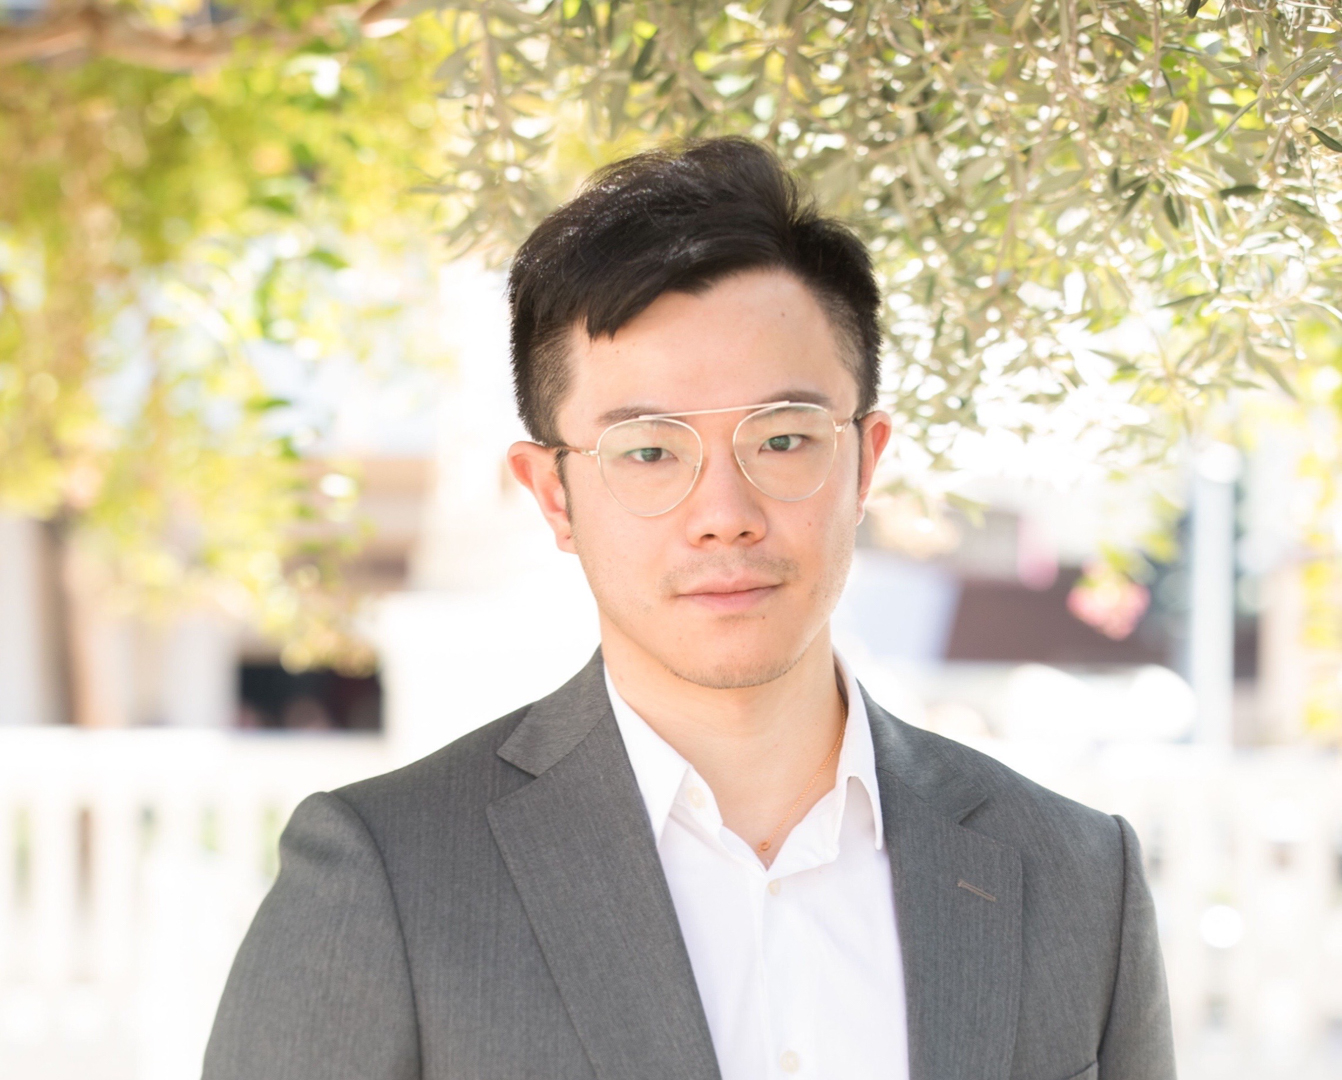 Dr. Zhe Qiang, Assistant Professor in the School of Polymer Science and Engineering